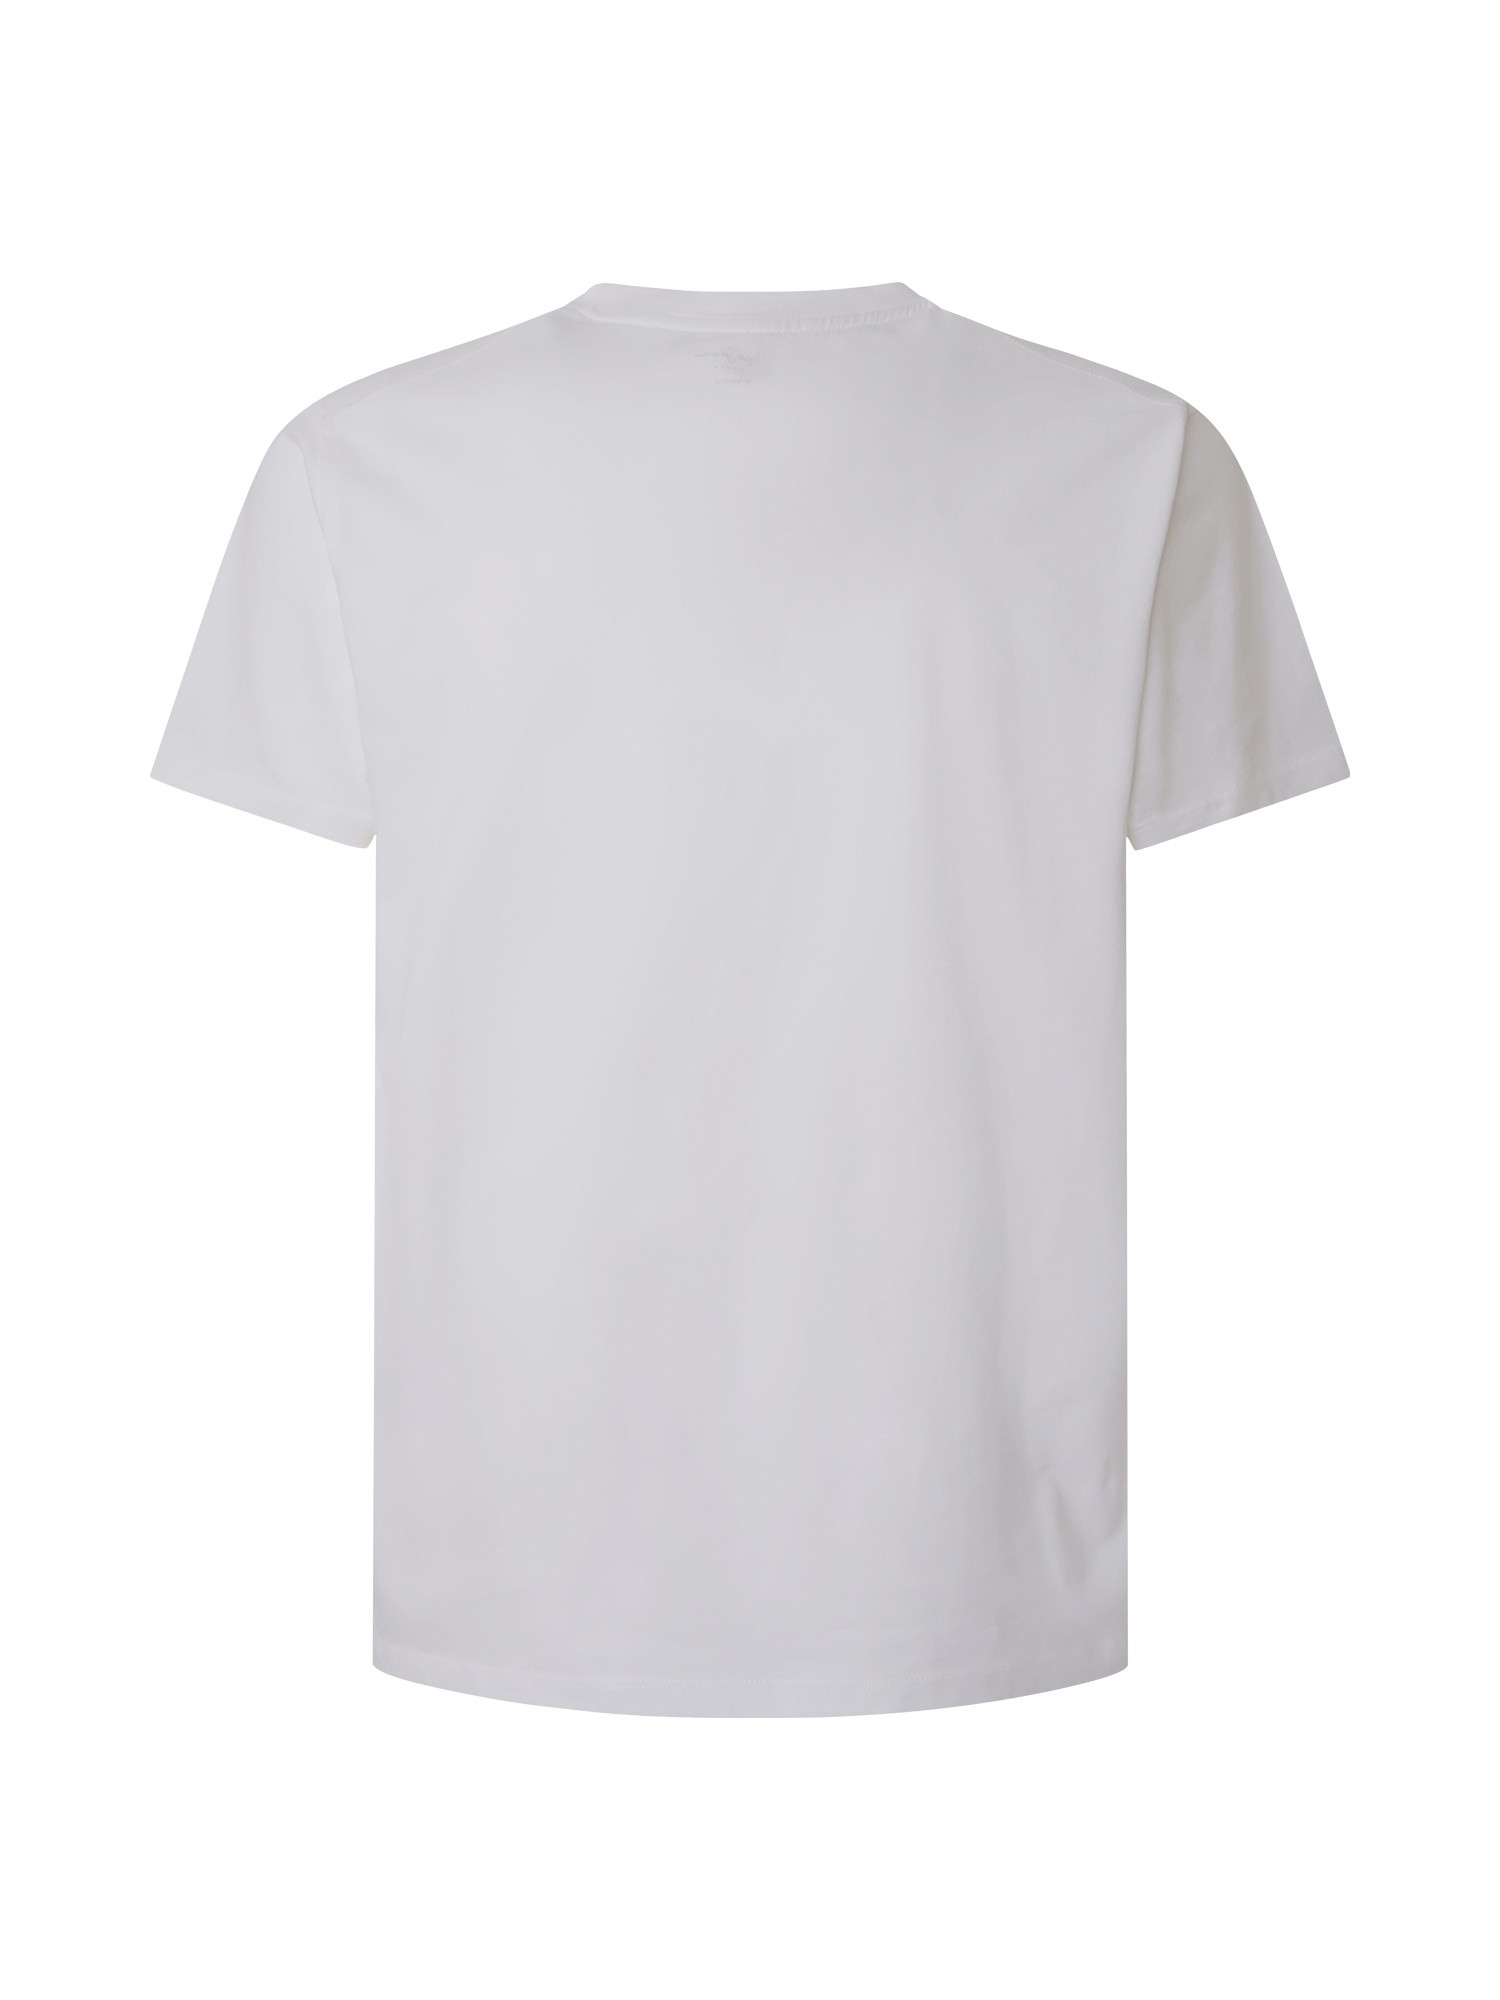 Pepe Jeans - Cotton T-shirt with lettering, White, large image number 1